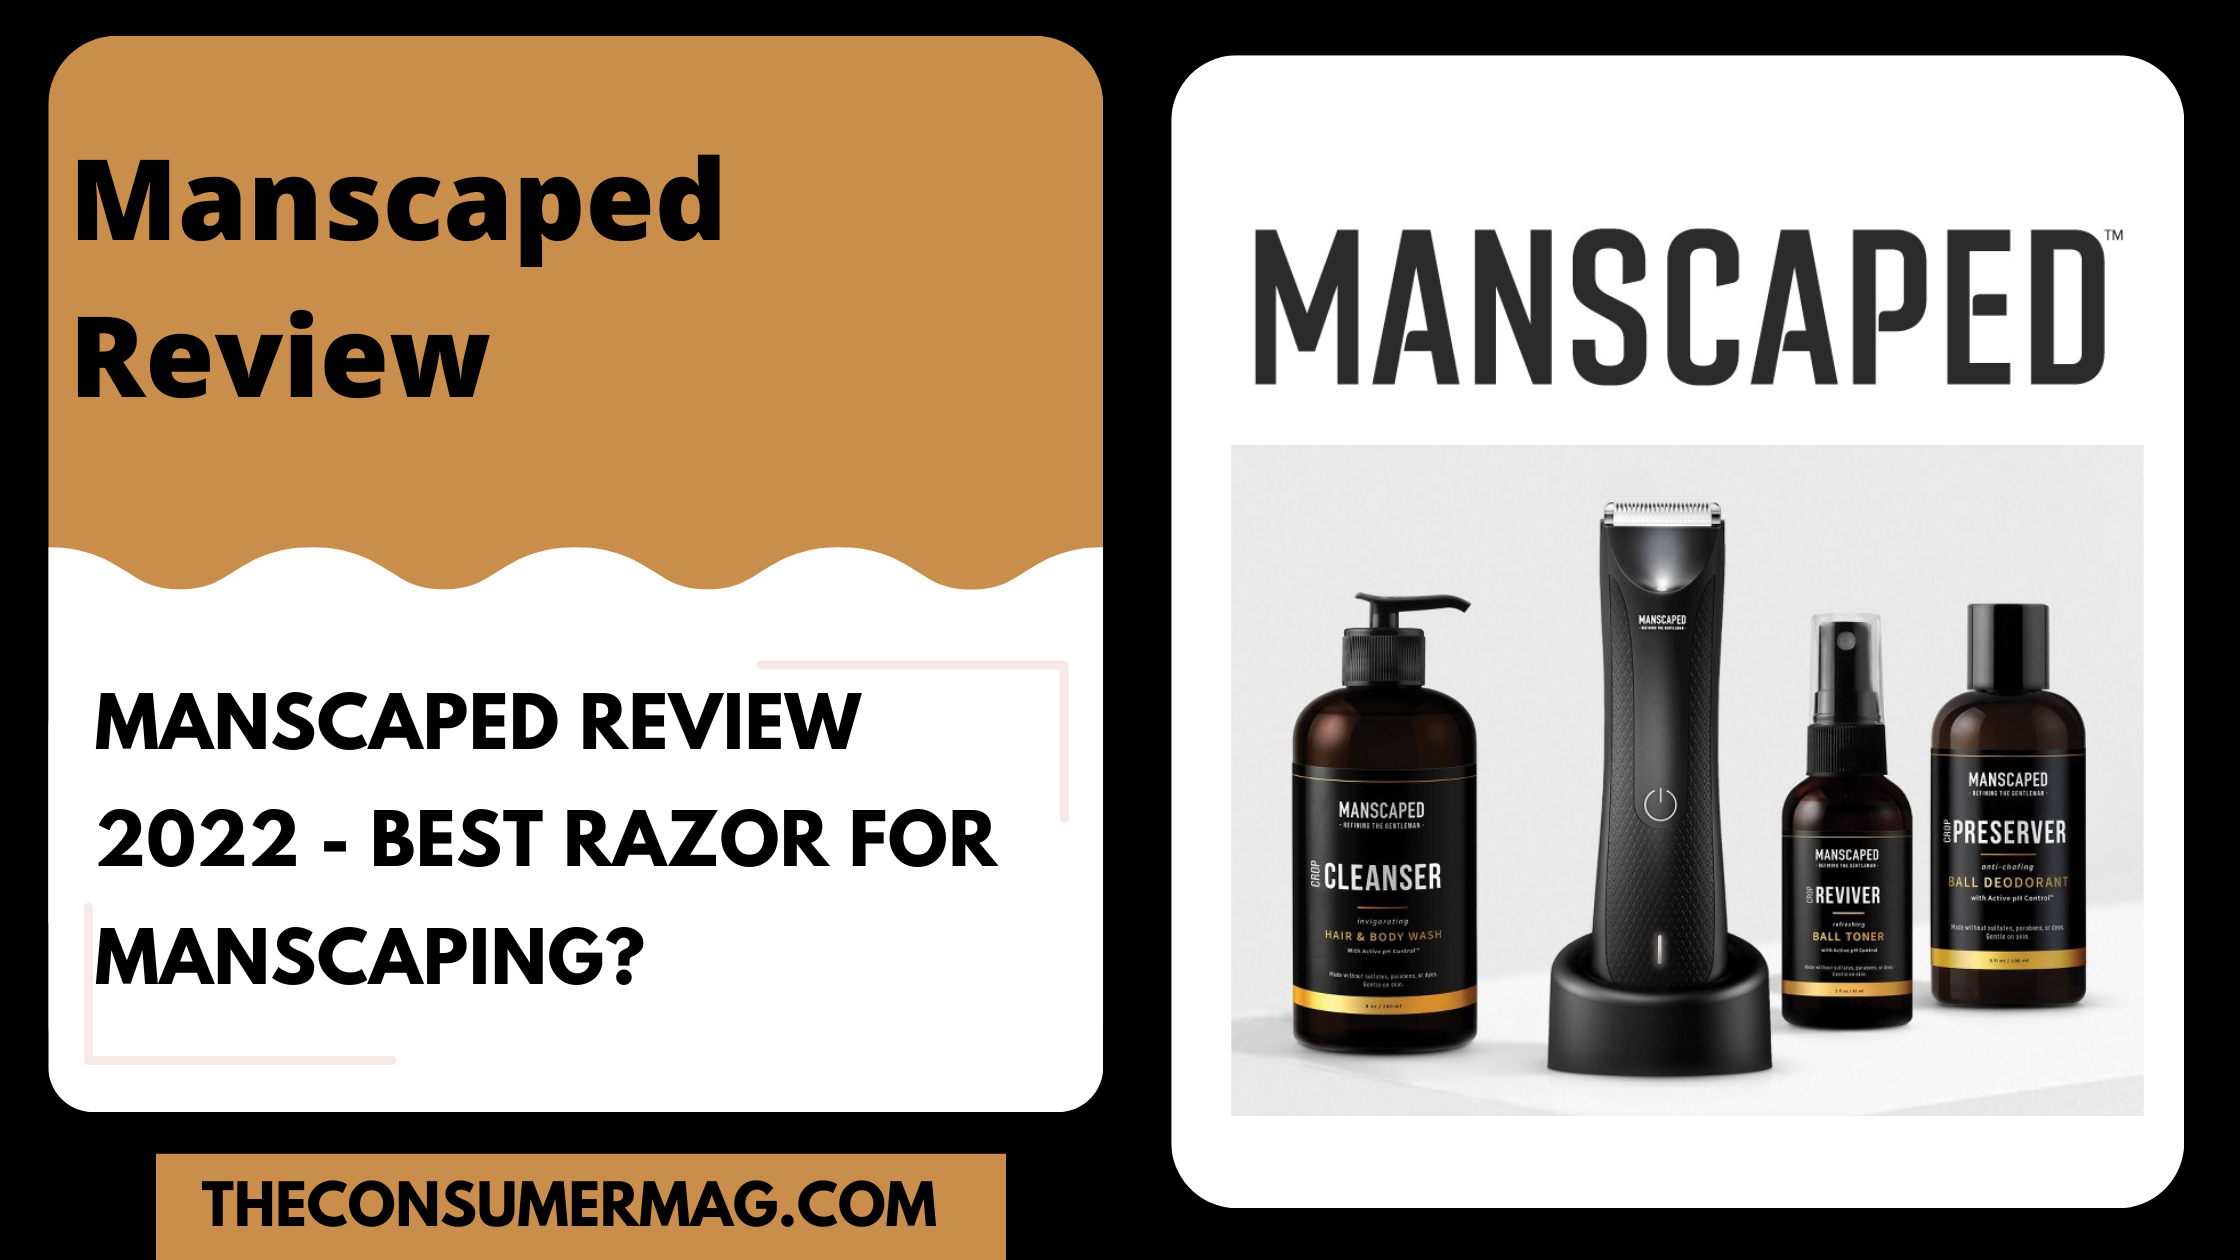 Manscaped featured image